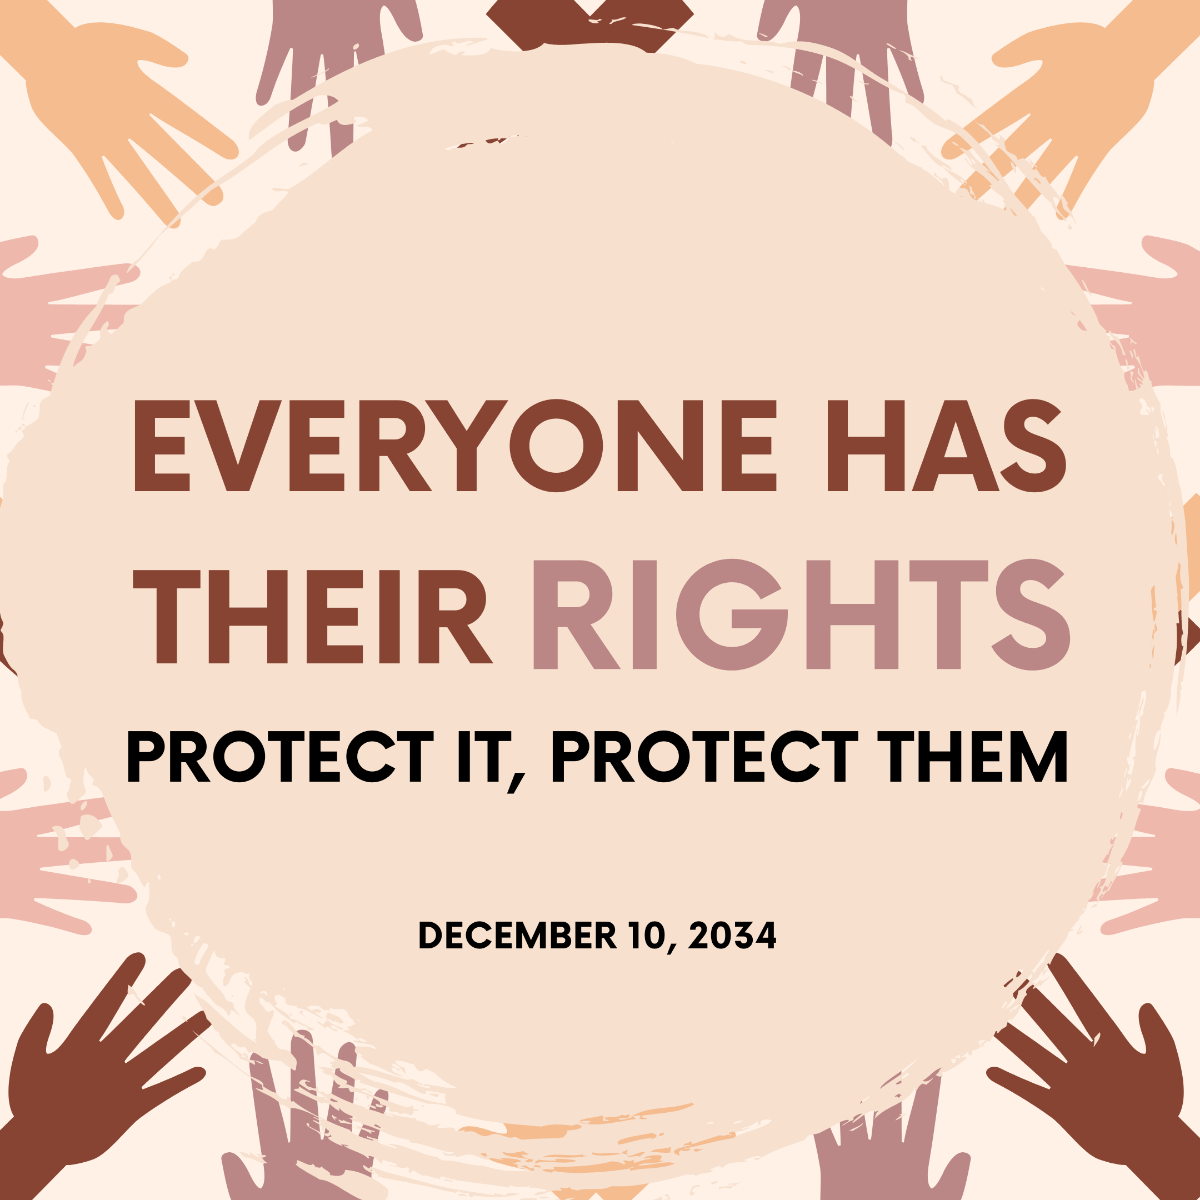 Free Human Rights Day Instagram Post Template